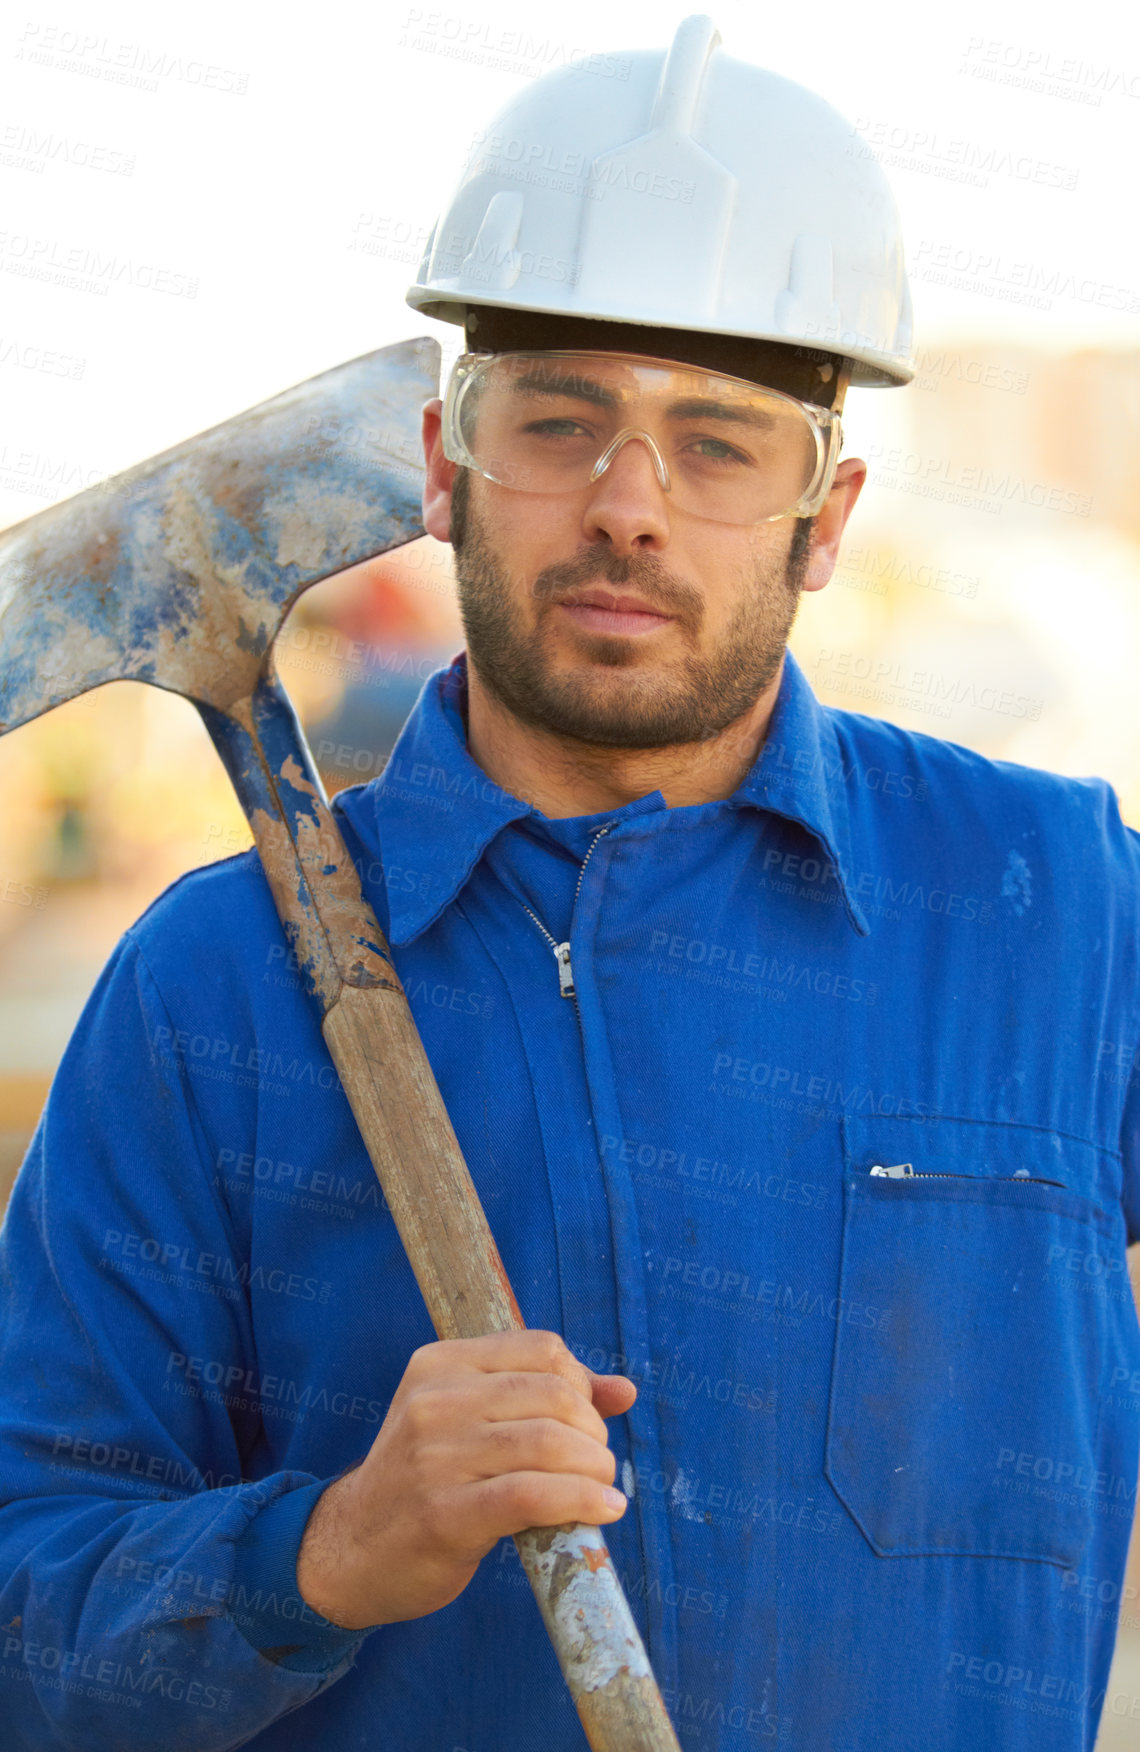 Buy stock photo Portrait of a construction worker with his shovel over his shoulder